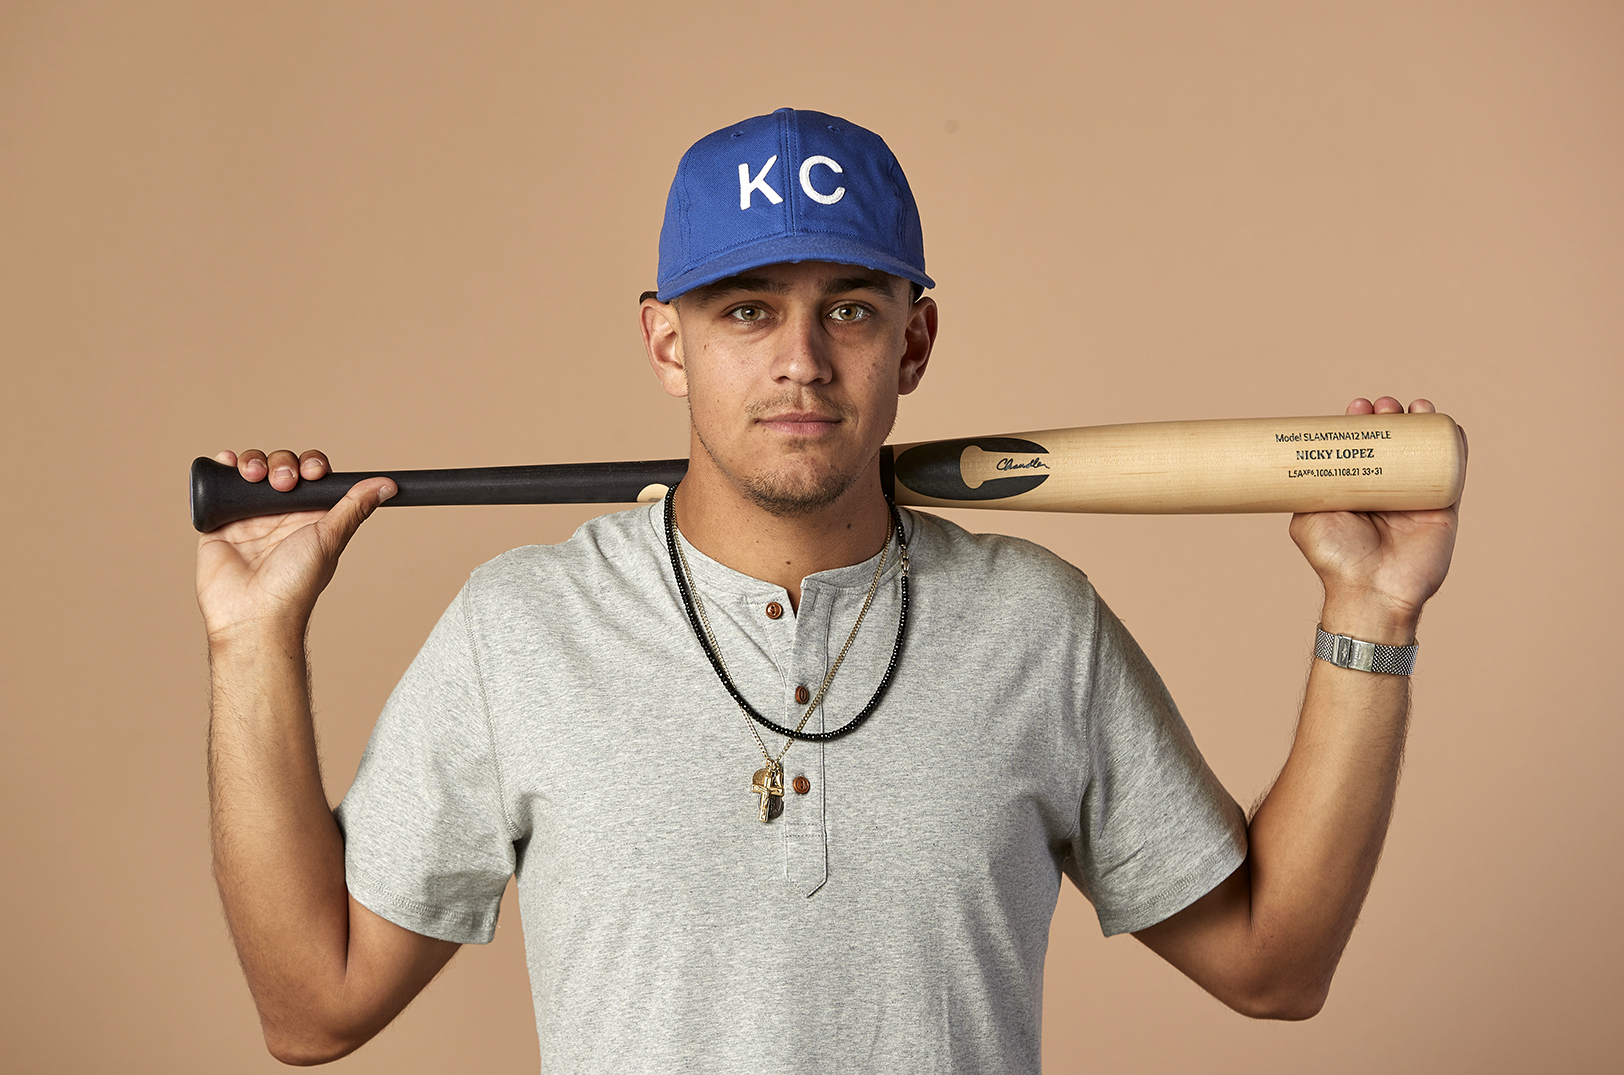 Sandlot scores endorsement by one of KC’s favorite players; how the deal puts this brand on a base path to the big leagues